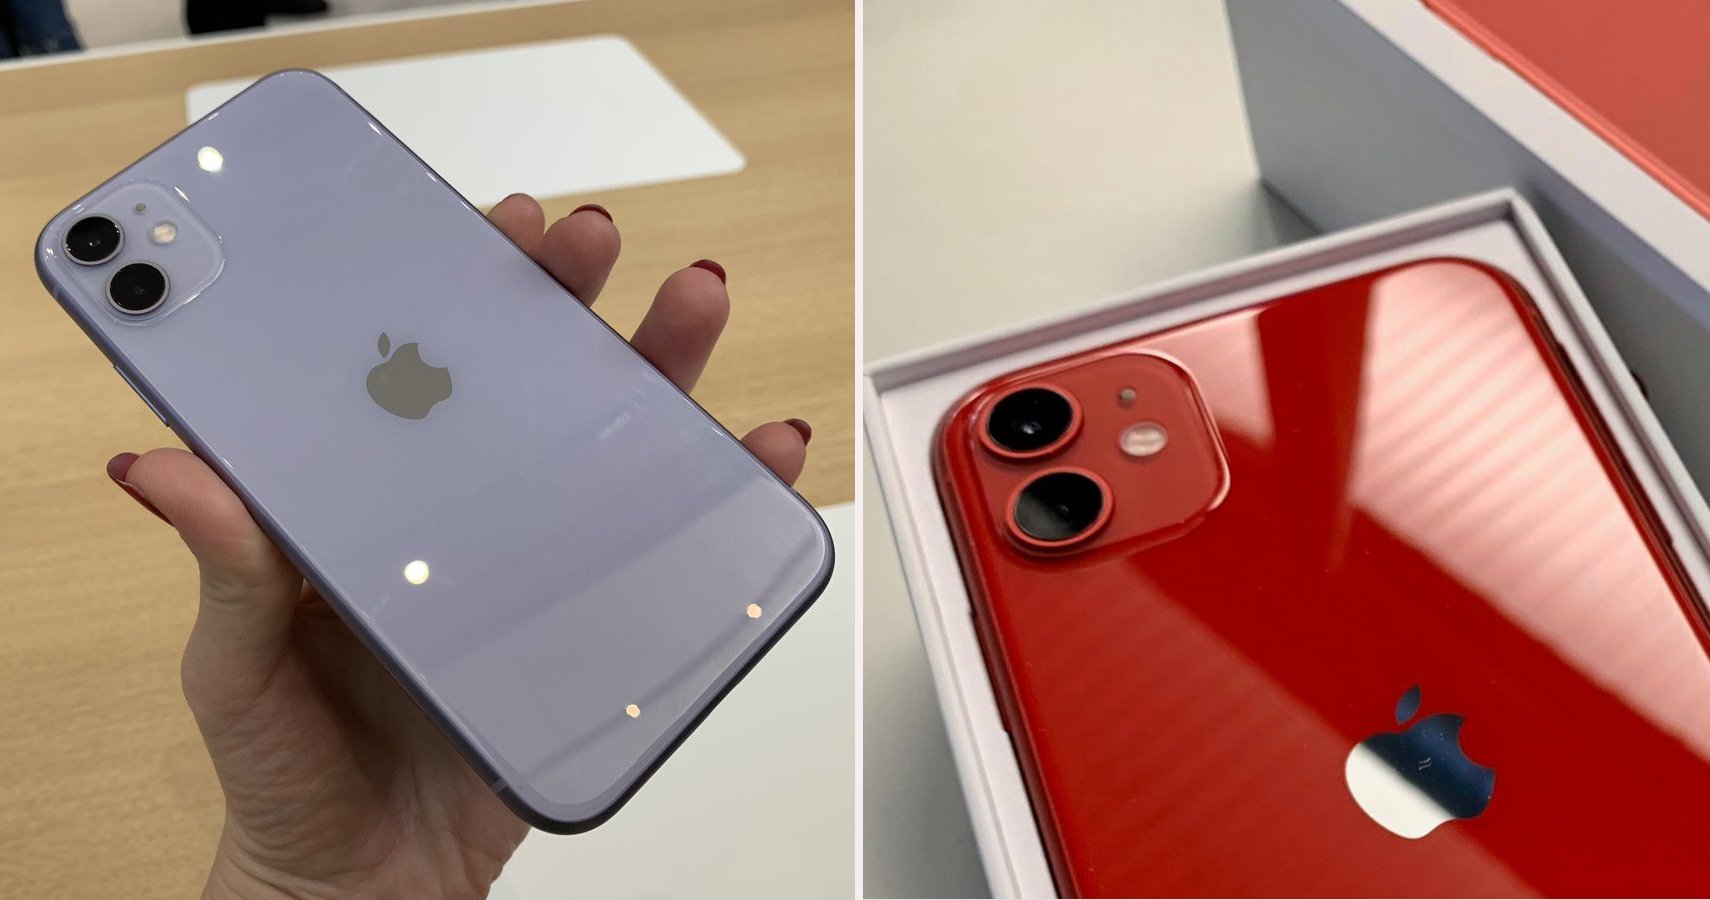 Ranking Every iPhone 11 Color From Worst To Best